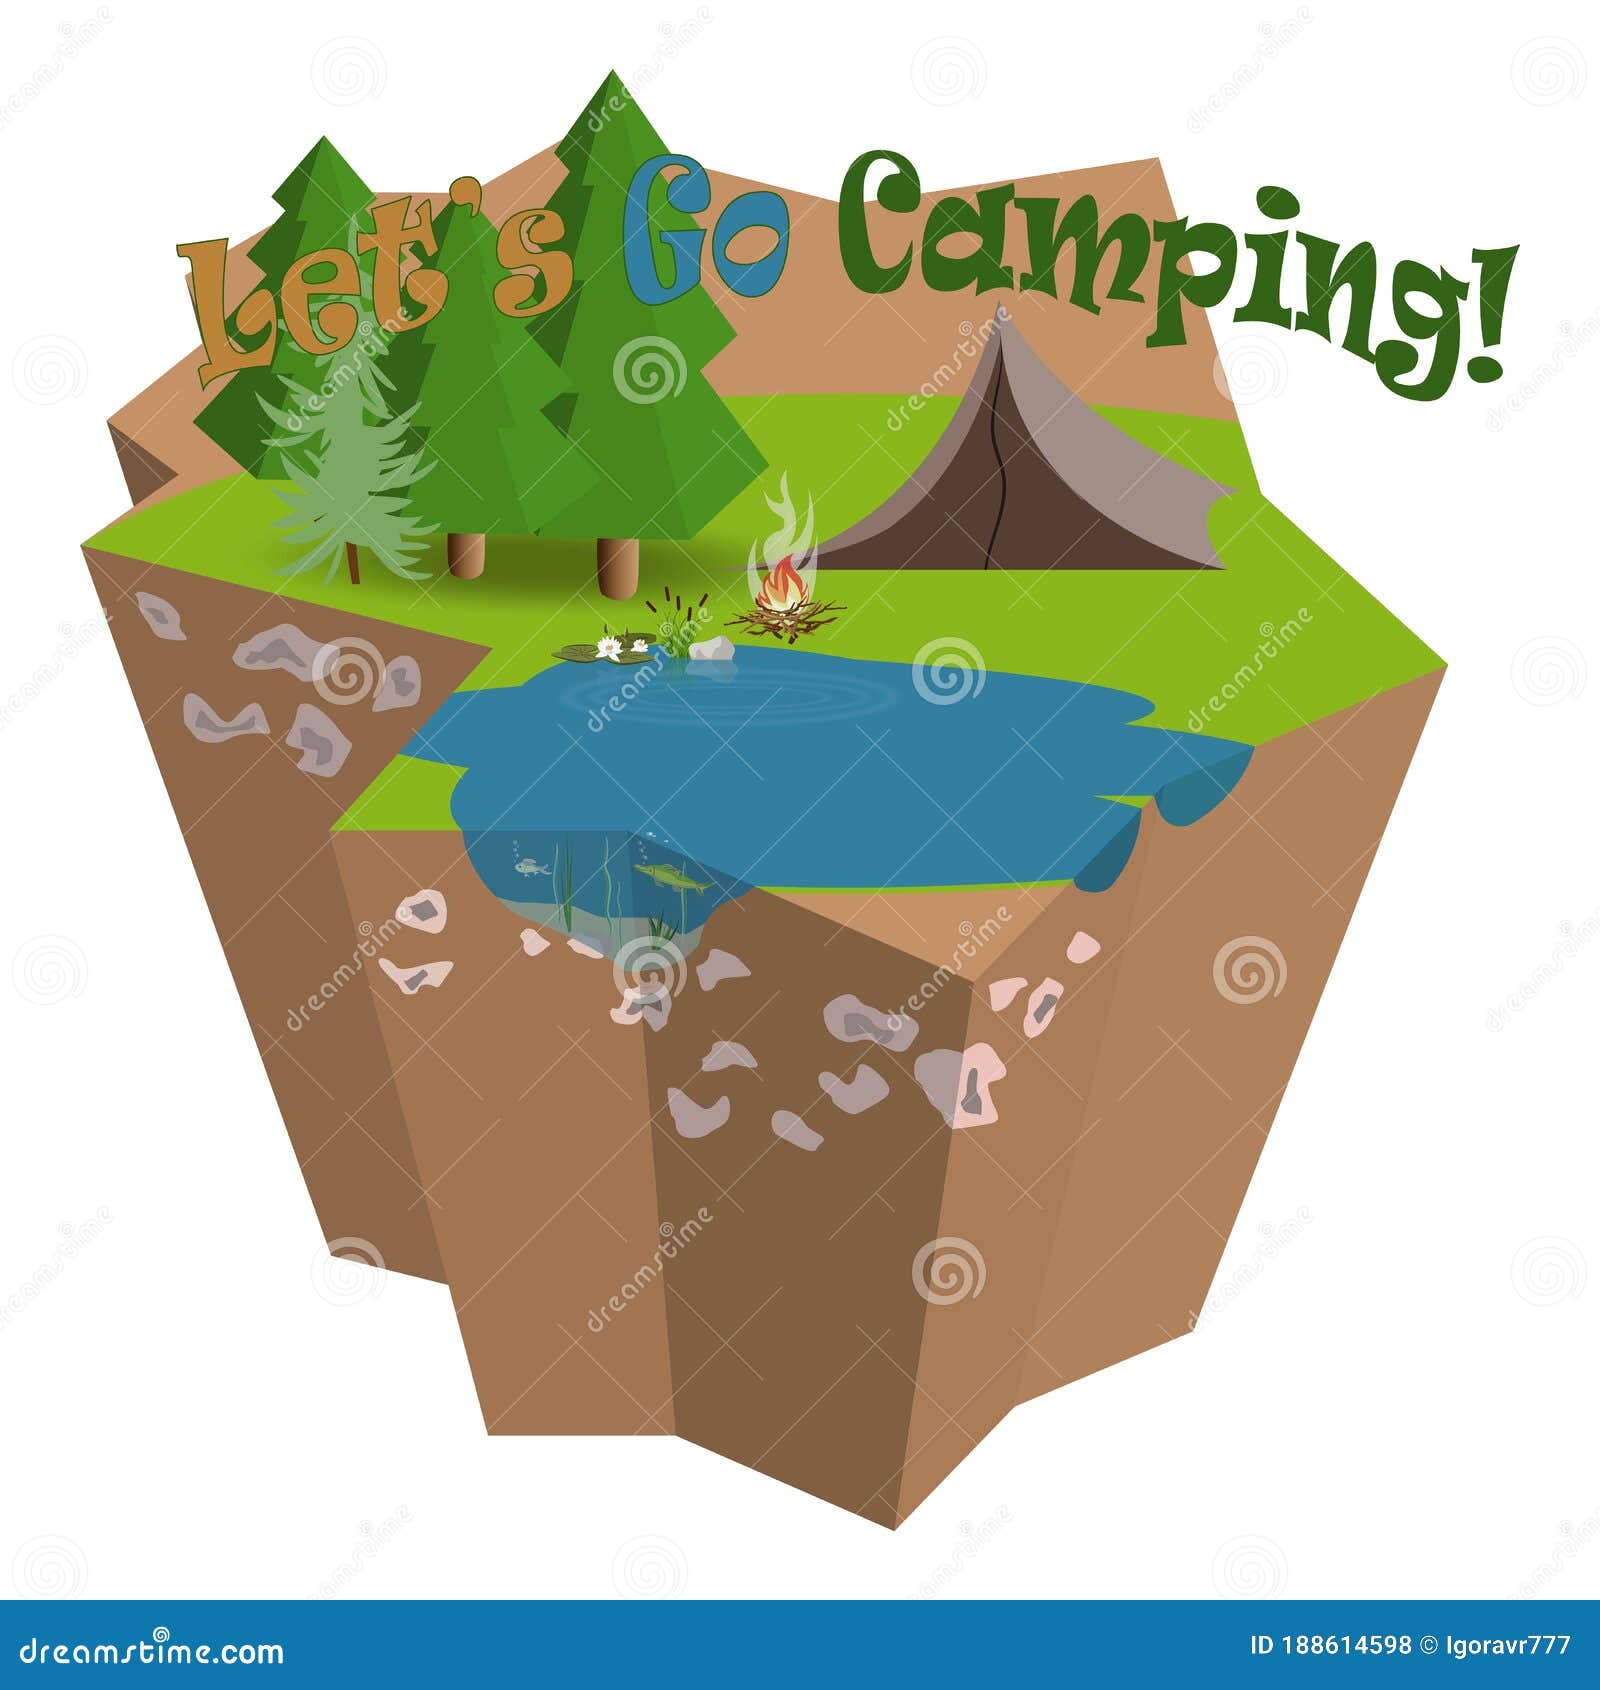 Lets Go Camping And Fishing Vector Illustration 3d Isometric Island